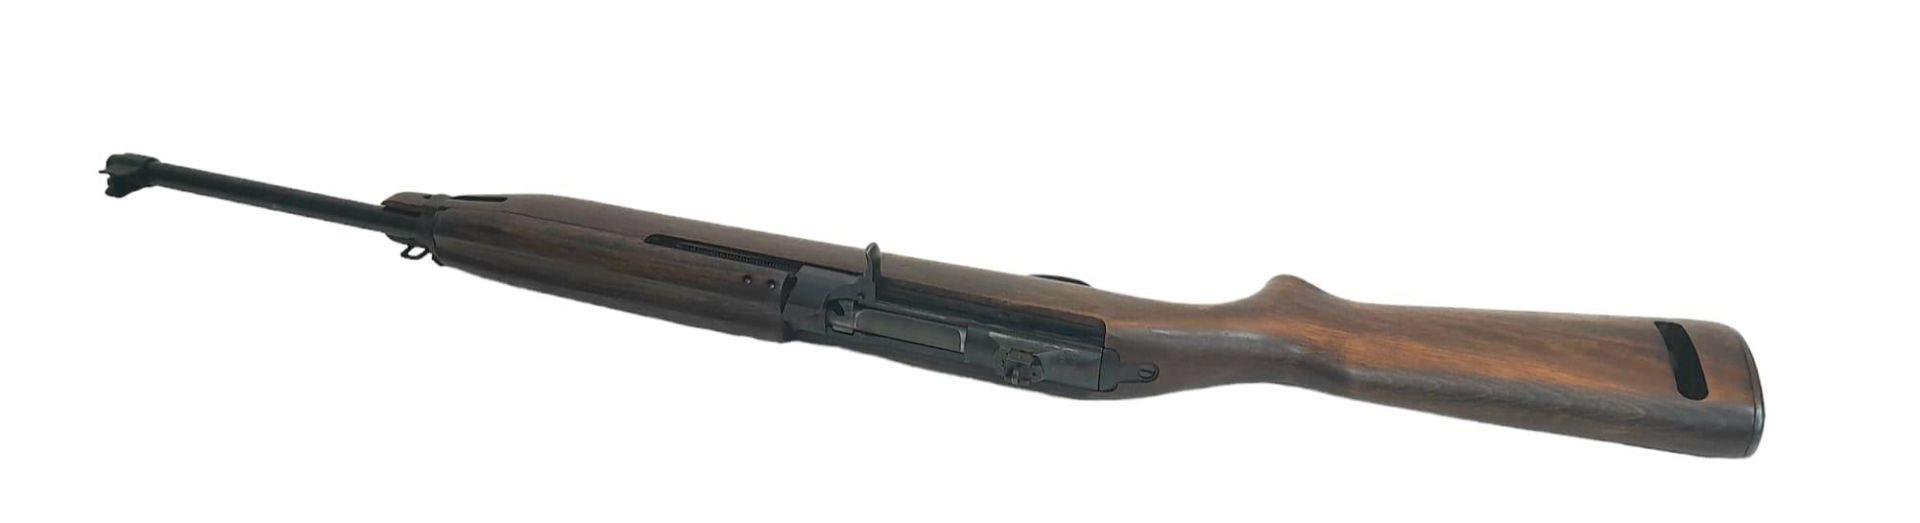 A Deactivated Winchester M1 Carbine Self Loading Rifle. Used by the USA in warfare from 1942-73 this - Image 4 of 12